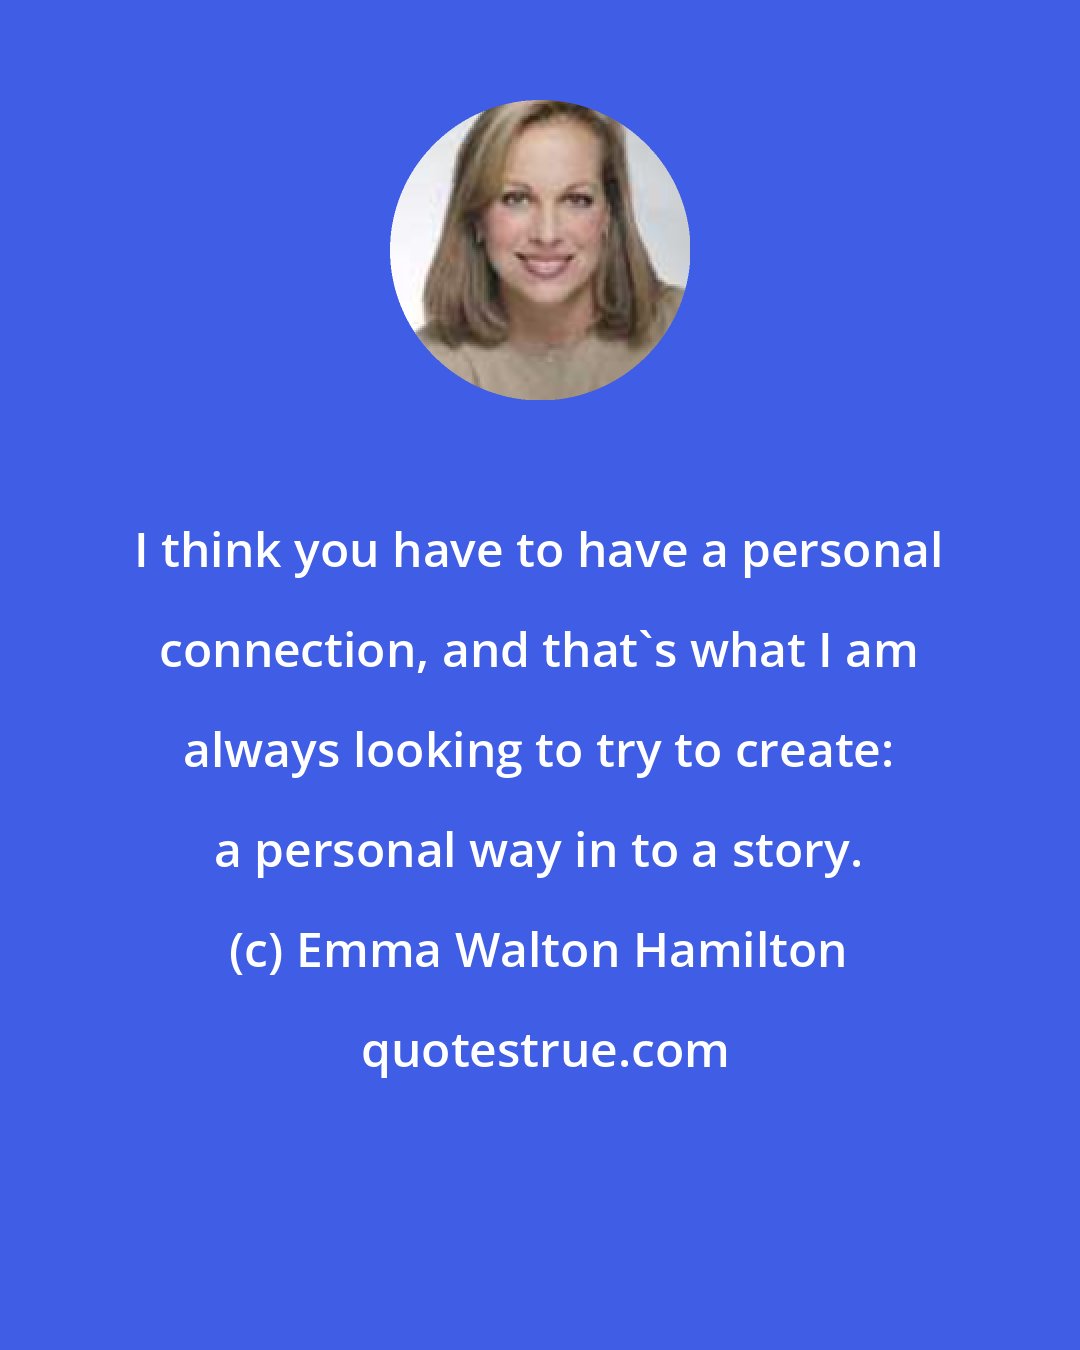 Emma Walton Hamilton: I think you have to have a personal connection, and that's what I am always looking to try to create: a personal way in to a story.